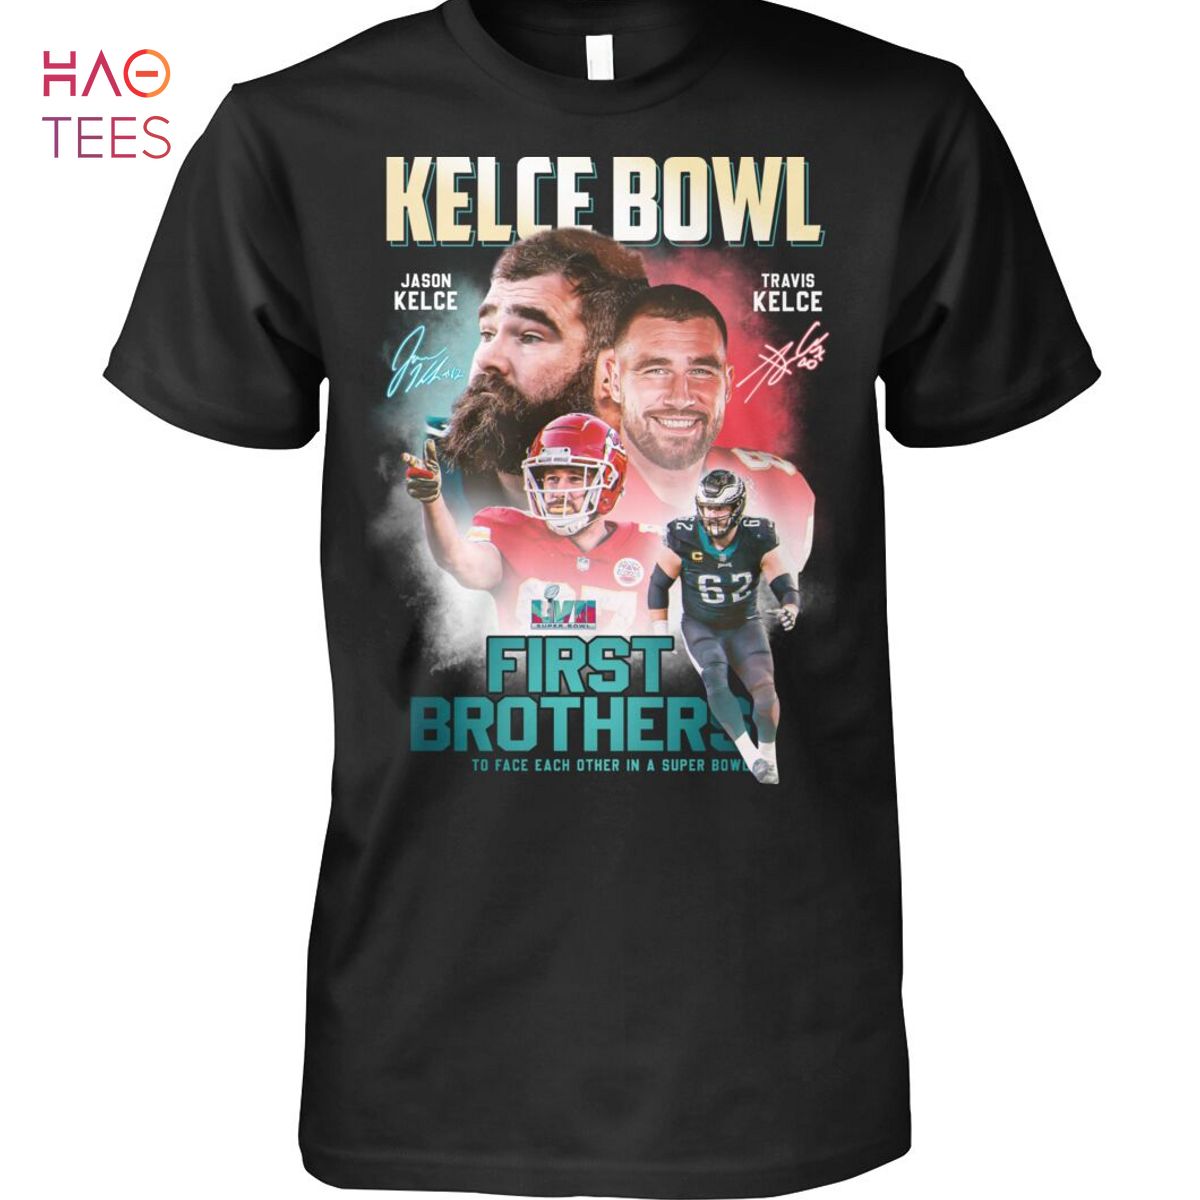 kelce brothers shirt